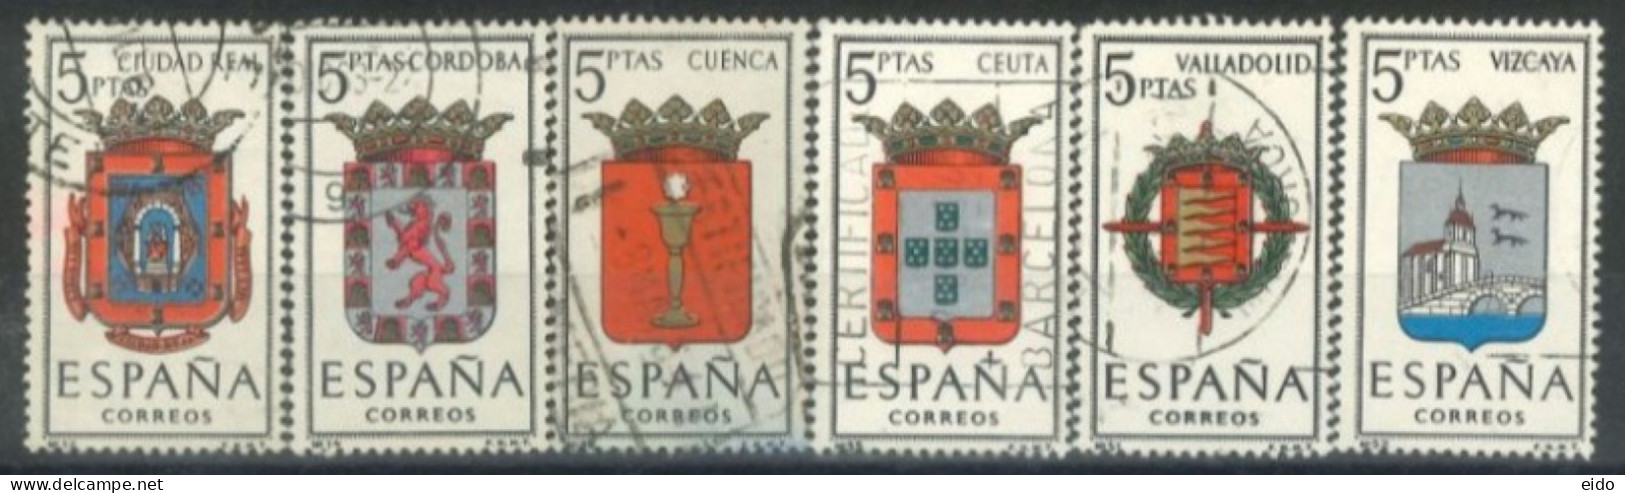 SPAIN,  1963/66, PROVINCIAL ARMS STAMPS SET OF 6, USED. - Gebraucht